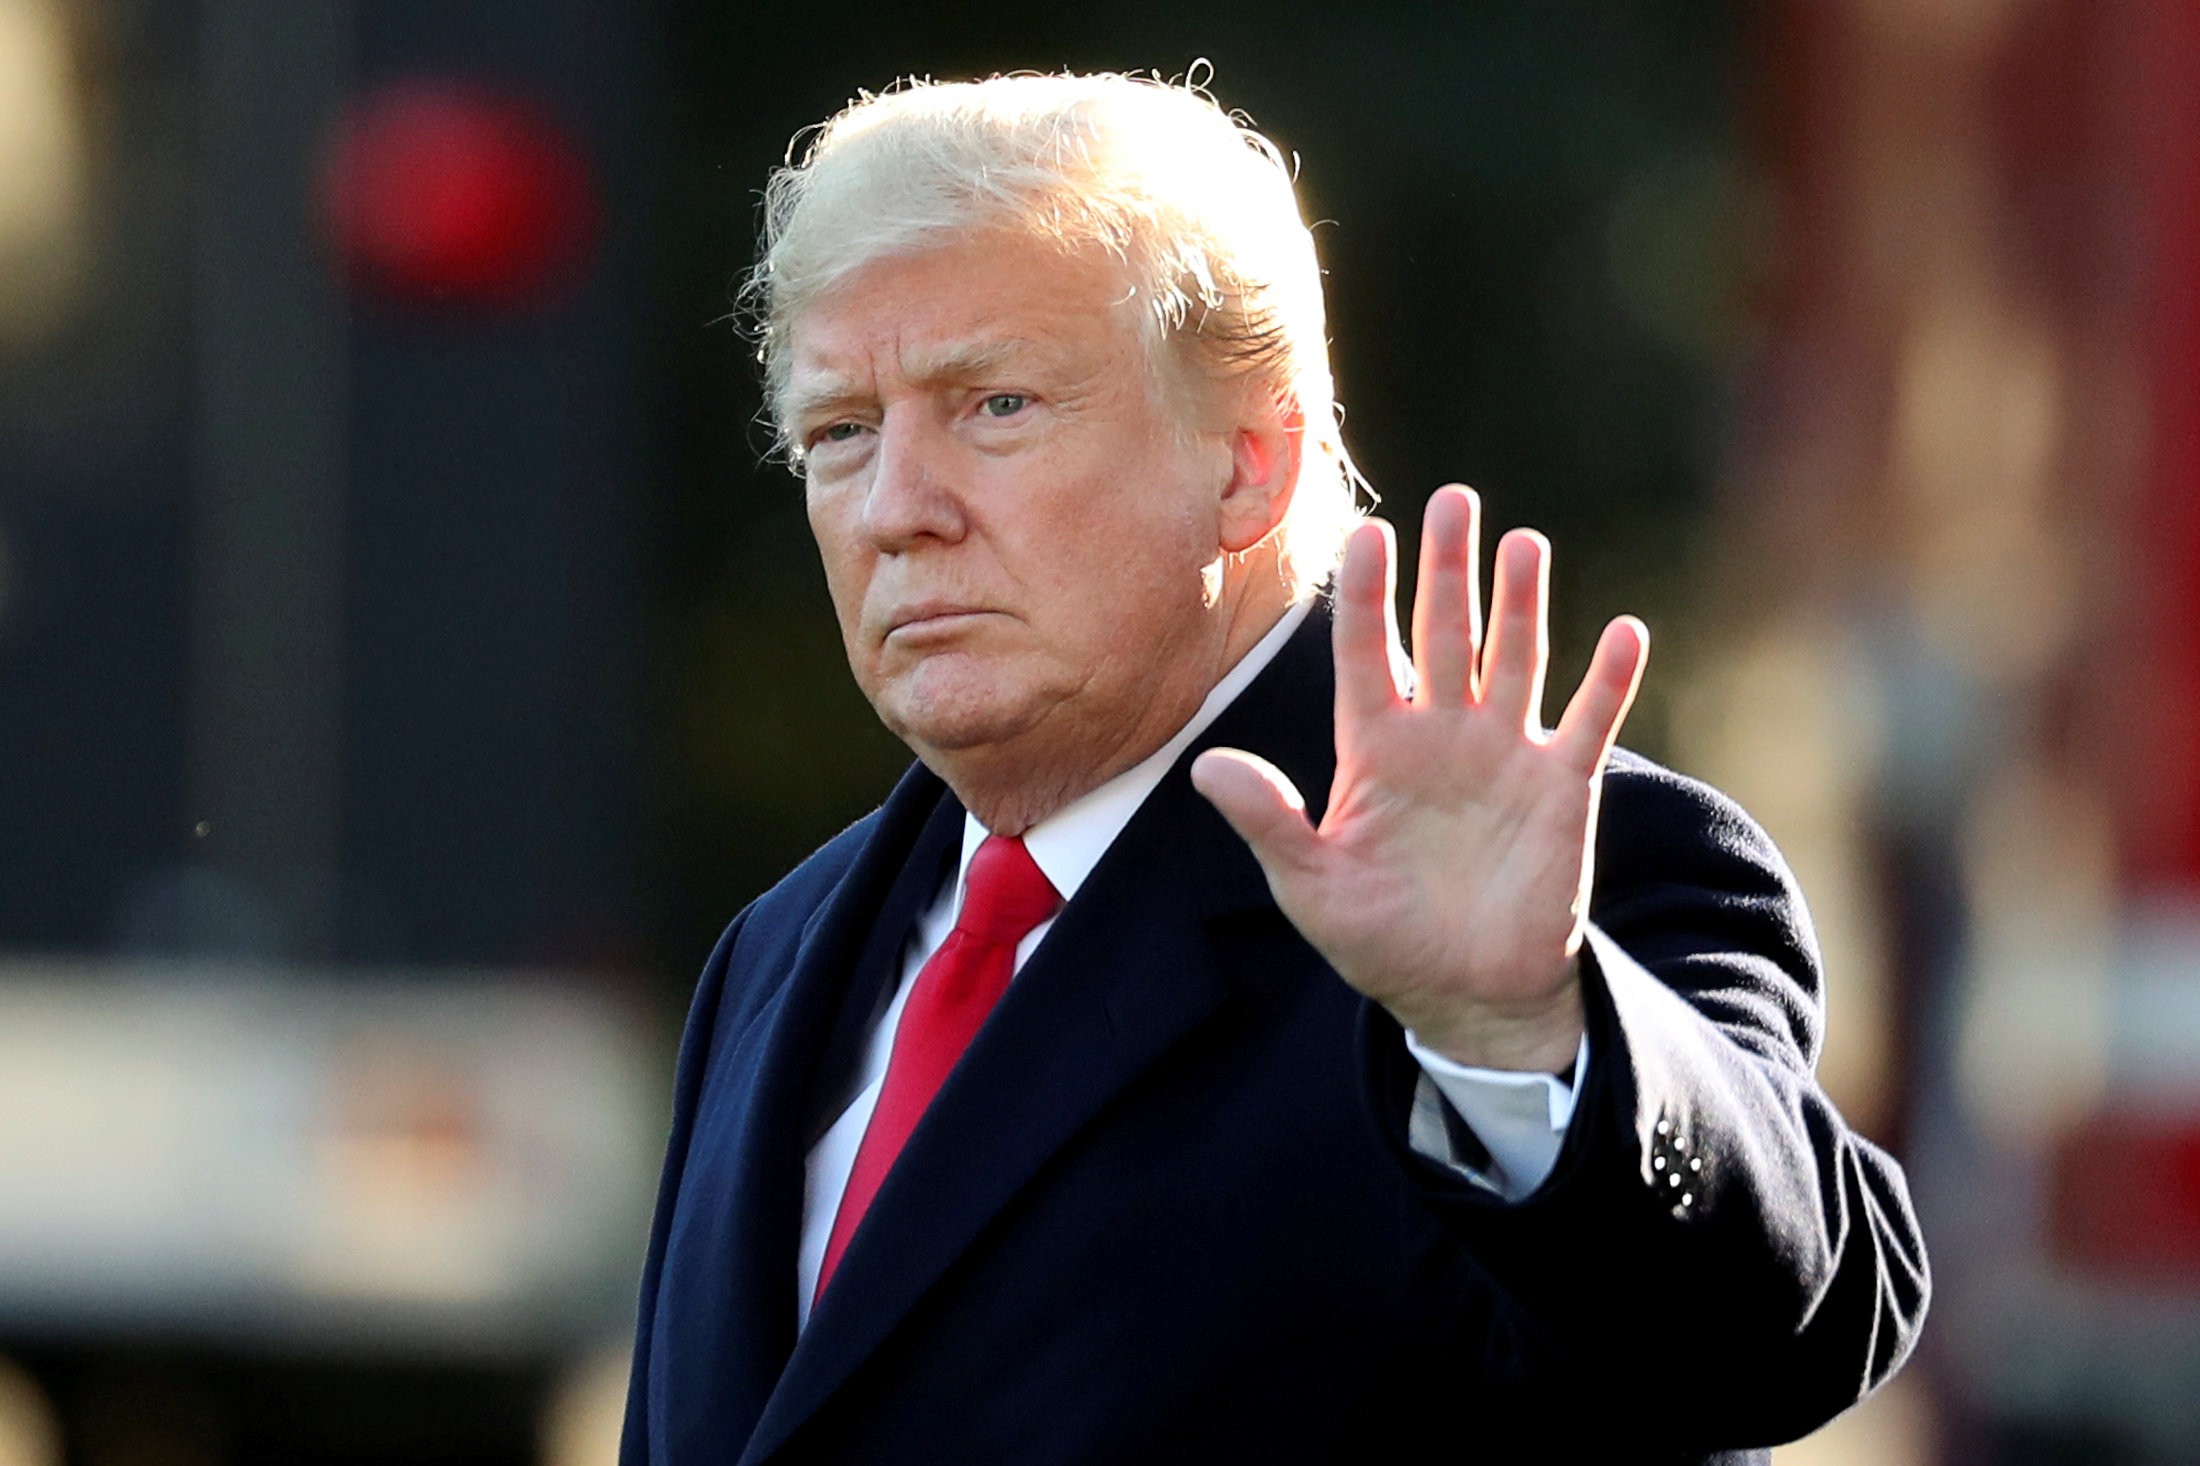 US President Donald Trump waves before leaving the White House for Wisconsin, on October 24, to campaign for Republican Senate candidate Leah Vukmir in the midterm elections. Photo: Reuters